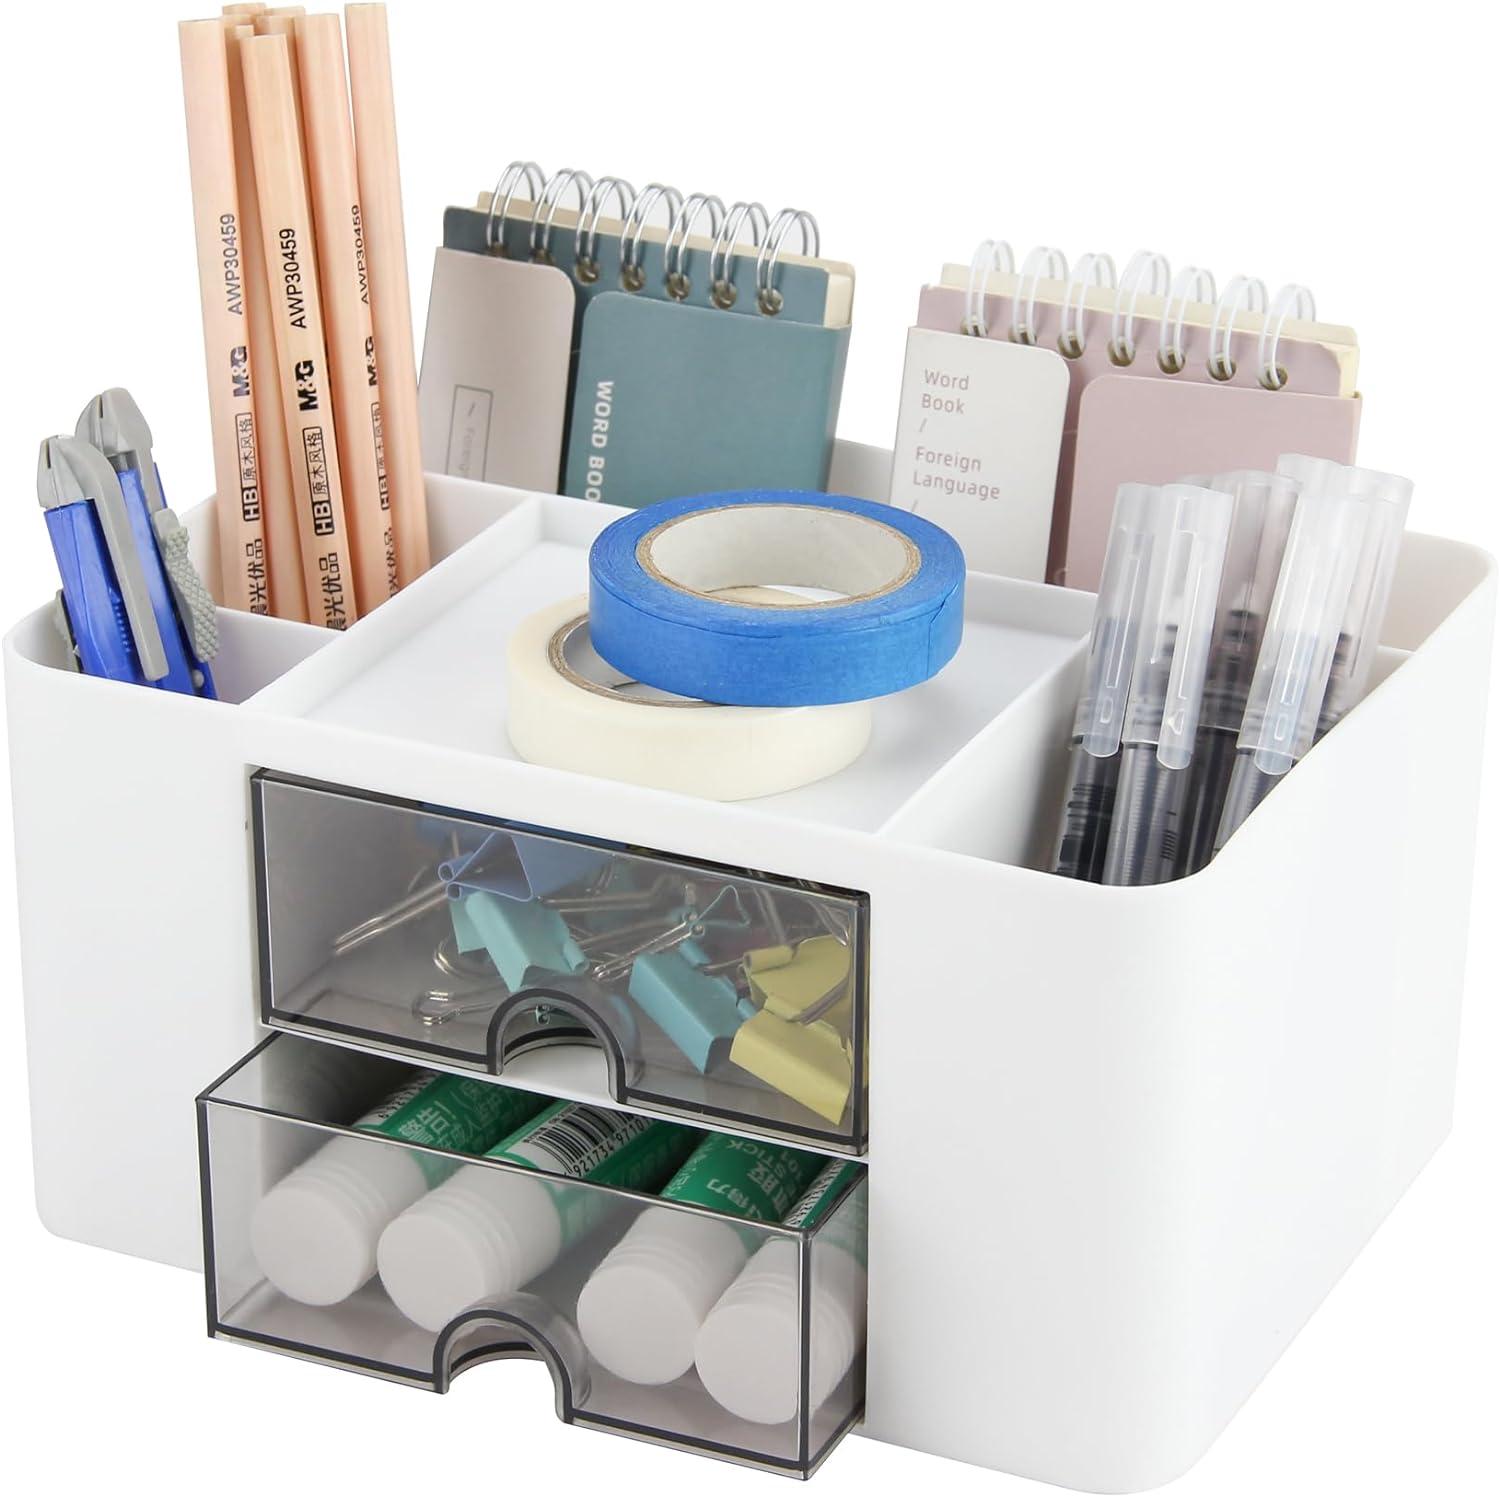 bycy office desk organizer with 2 drawers cute desk accessories organizer plastic pen holder for desktop